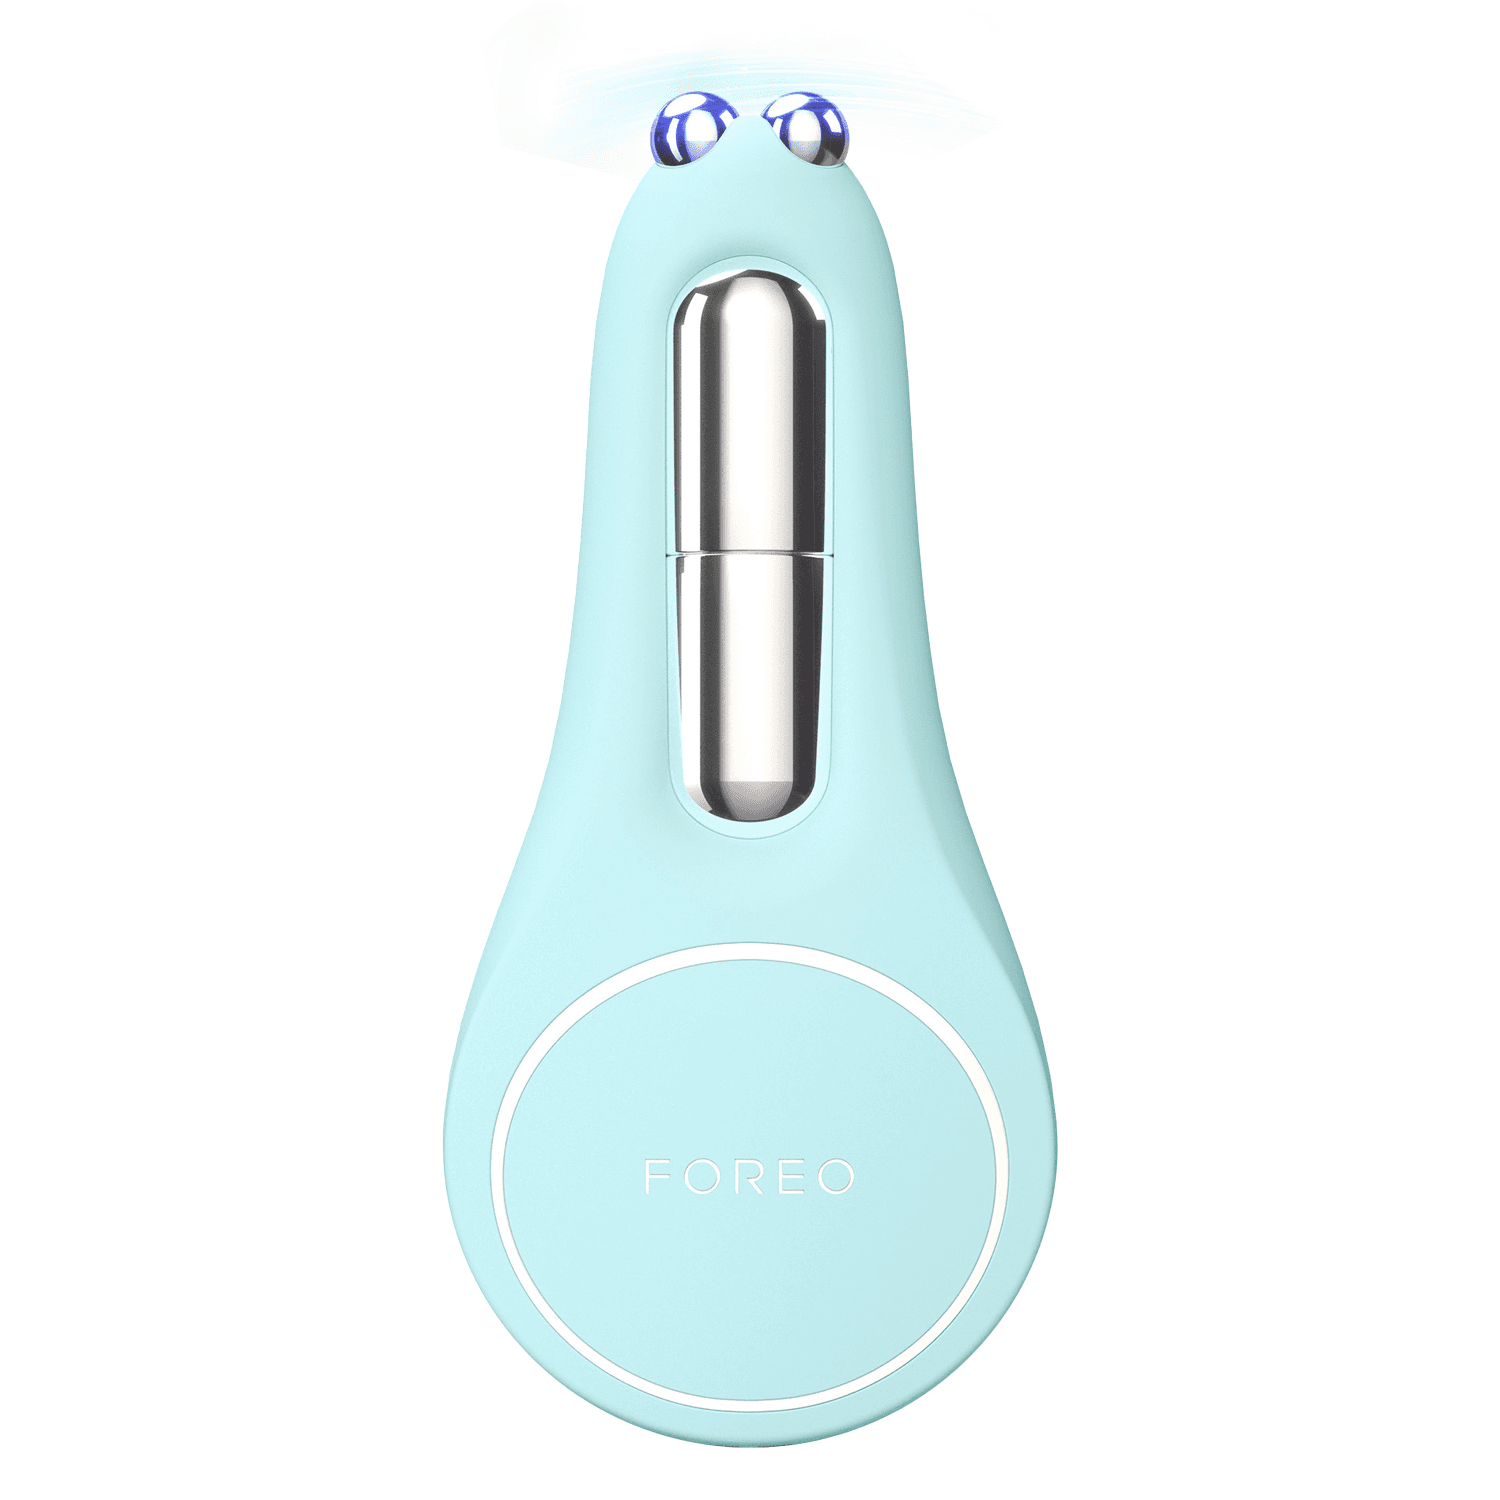 BEAR™ 2 eyes & lips - Microcurrent Line Smoothing Device Eyes & Lips Arctic Blue